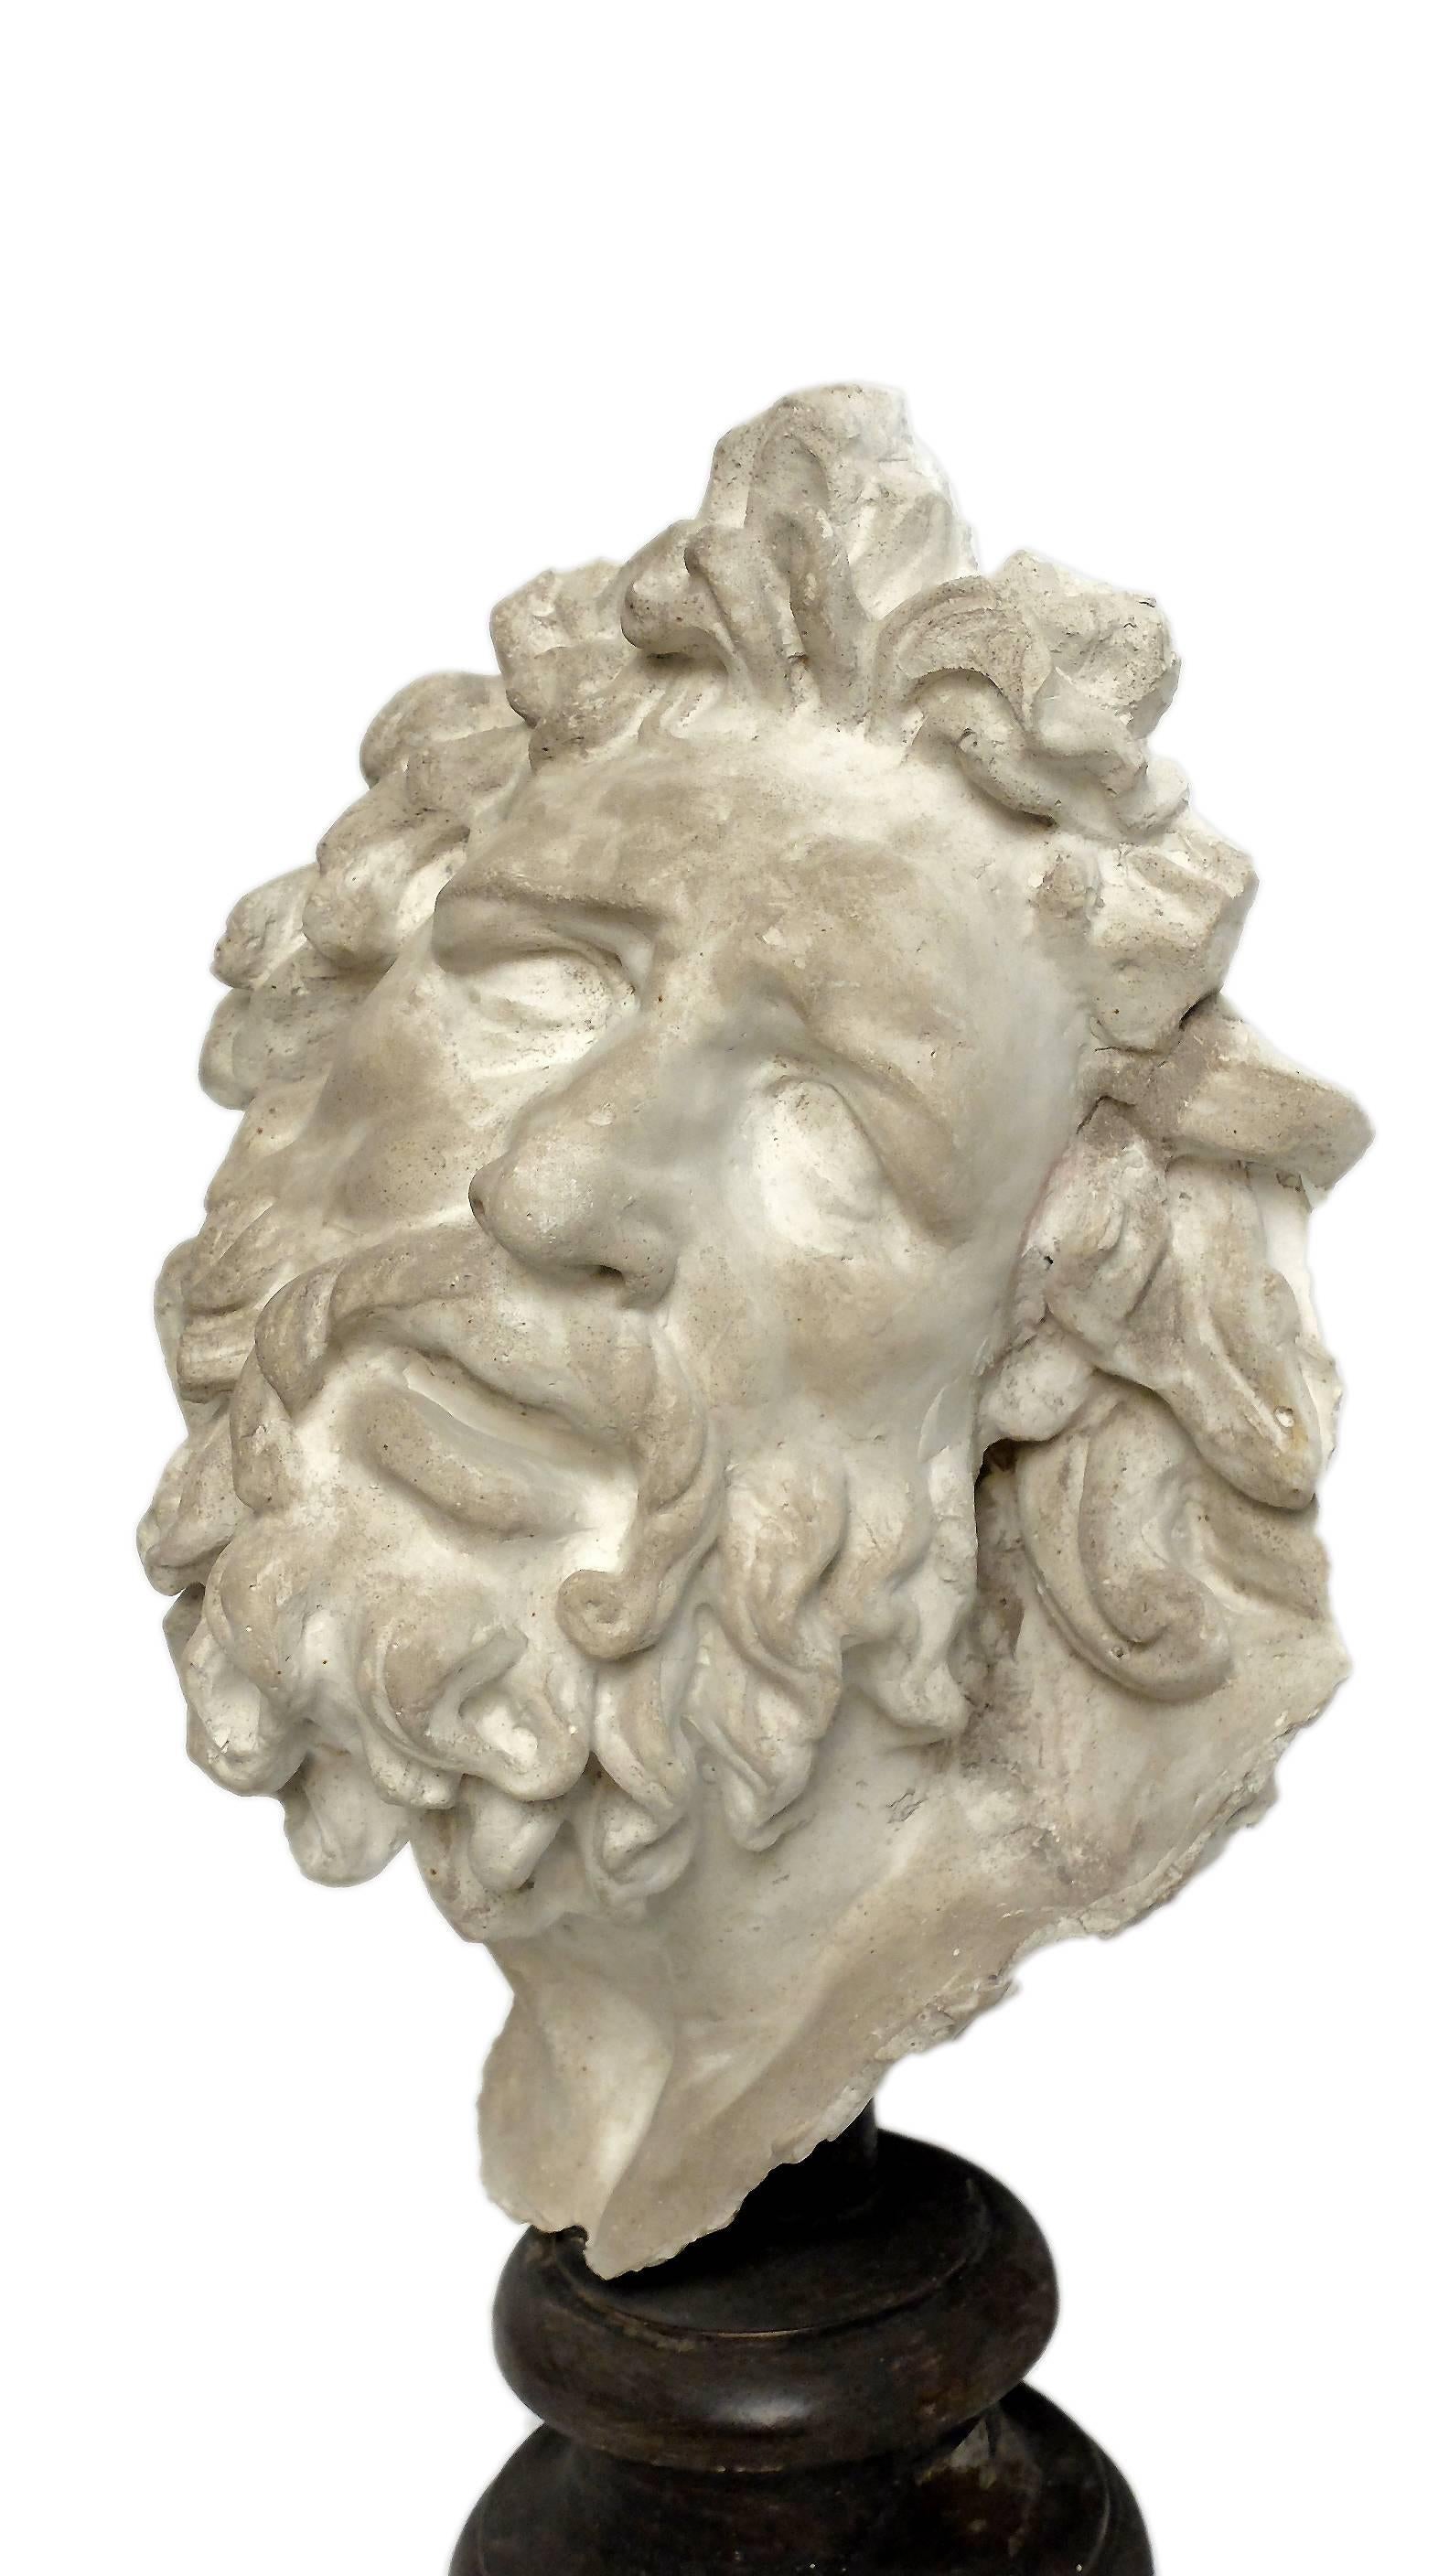 Over the wooden, black painted base is set the superb cast of Laocoonte’s sculpture group head. Cast for drawing teaching in academy, Italy, circa 1890.